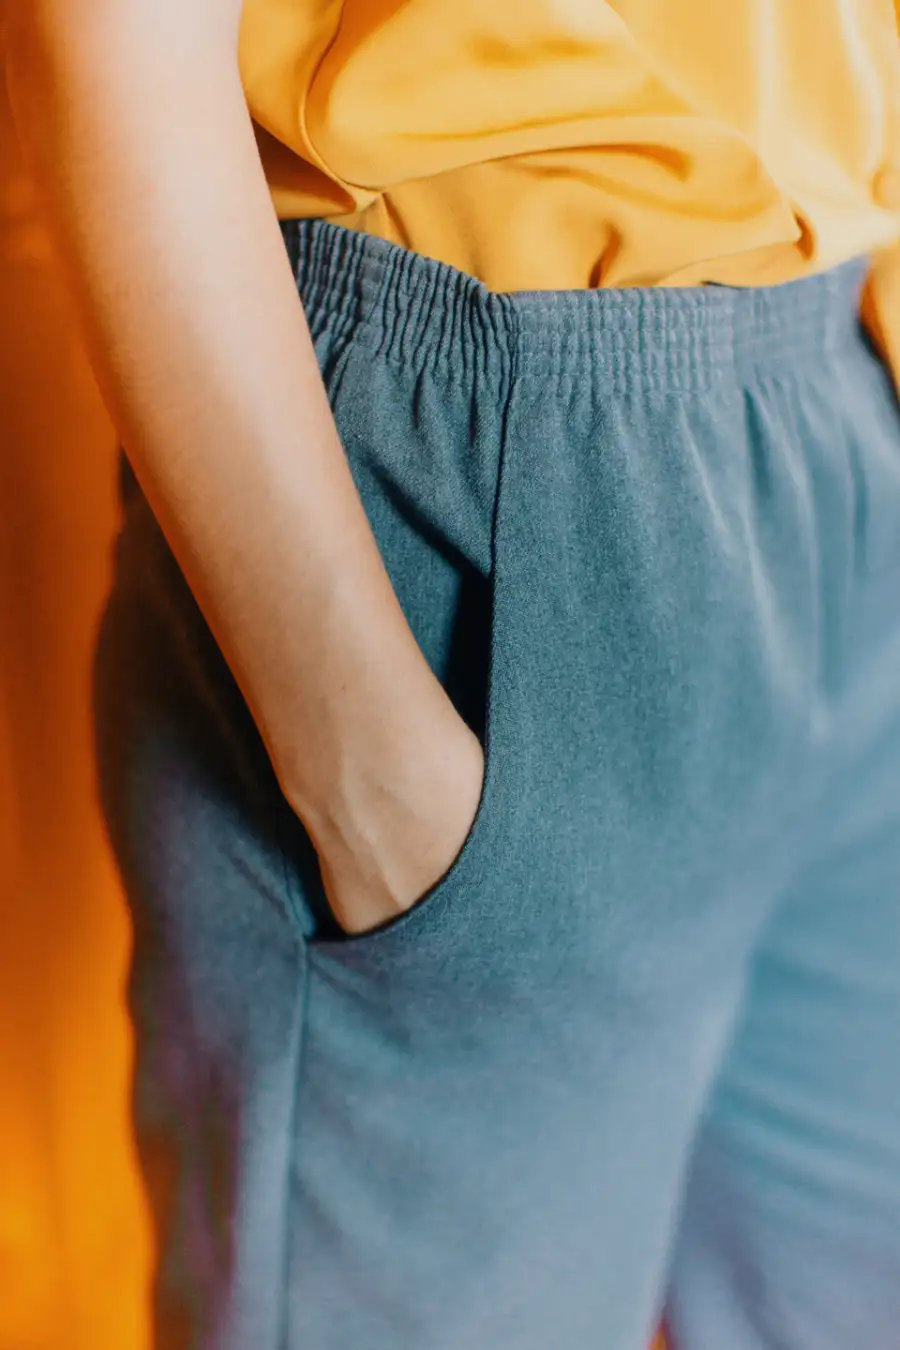 View of the mid section of a person. You can see the bottom of their orange shirt and the tops of their gray, jogger yoga pants. They are placing their hands in their pockets.